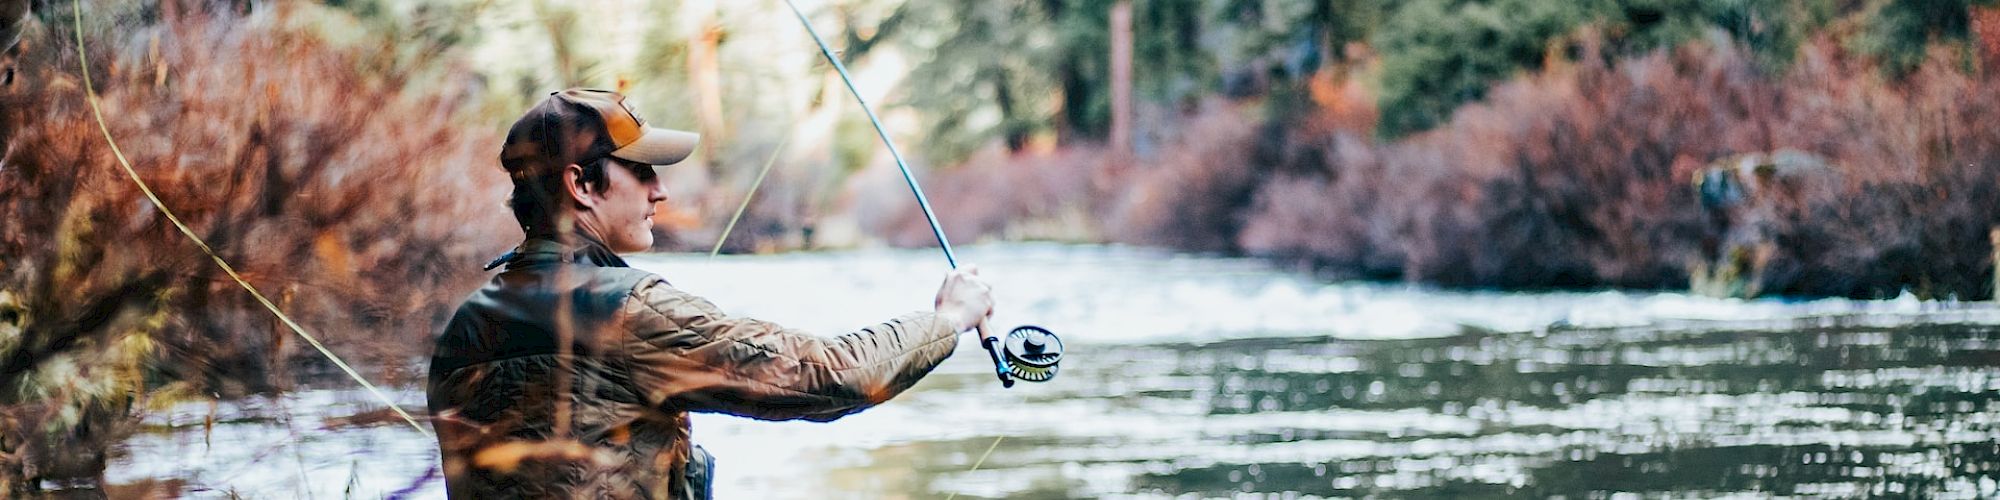 Master the Art of Fly Fishing with Orvis Fly Fishing School: Learn from  Experts at The Equinox Resort